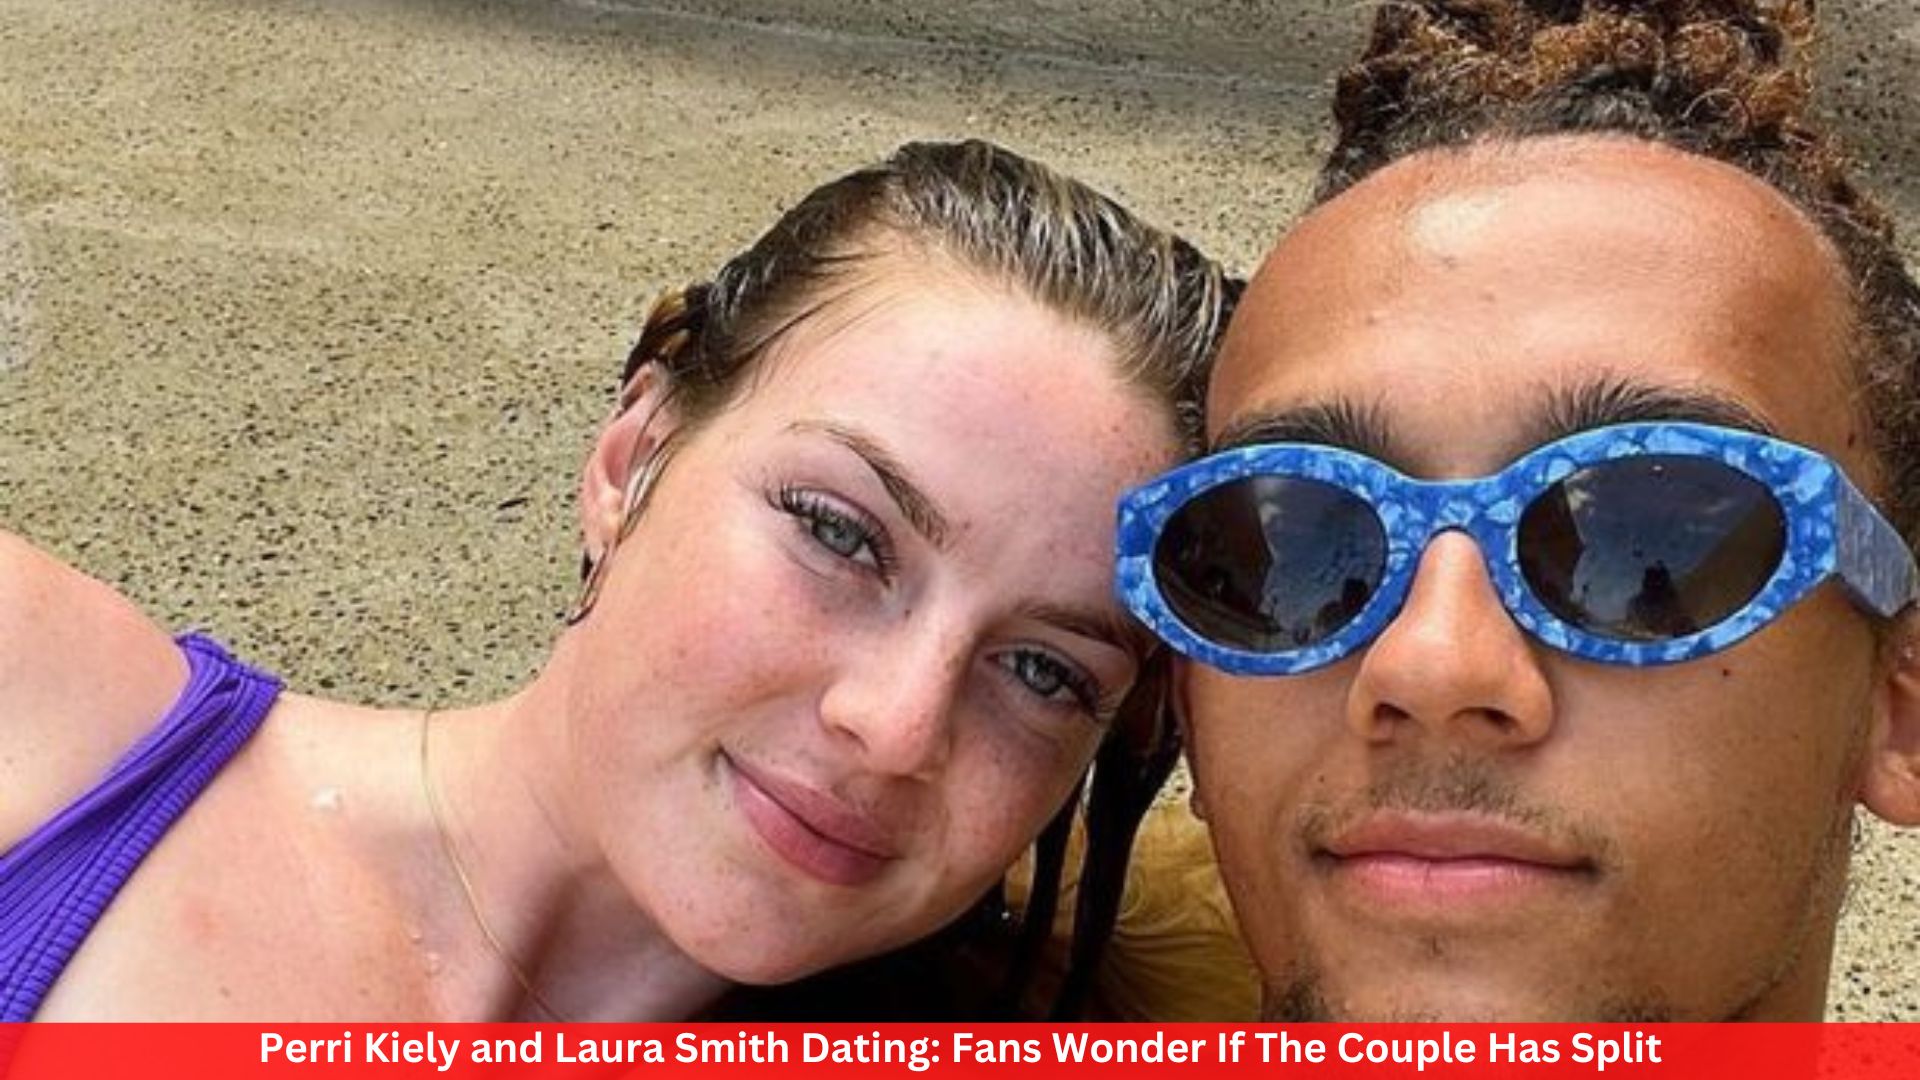 Perri Kiely and Laura Smith Dating: Fans Wonder If The Couple Has Split